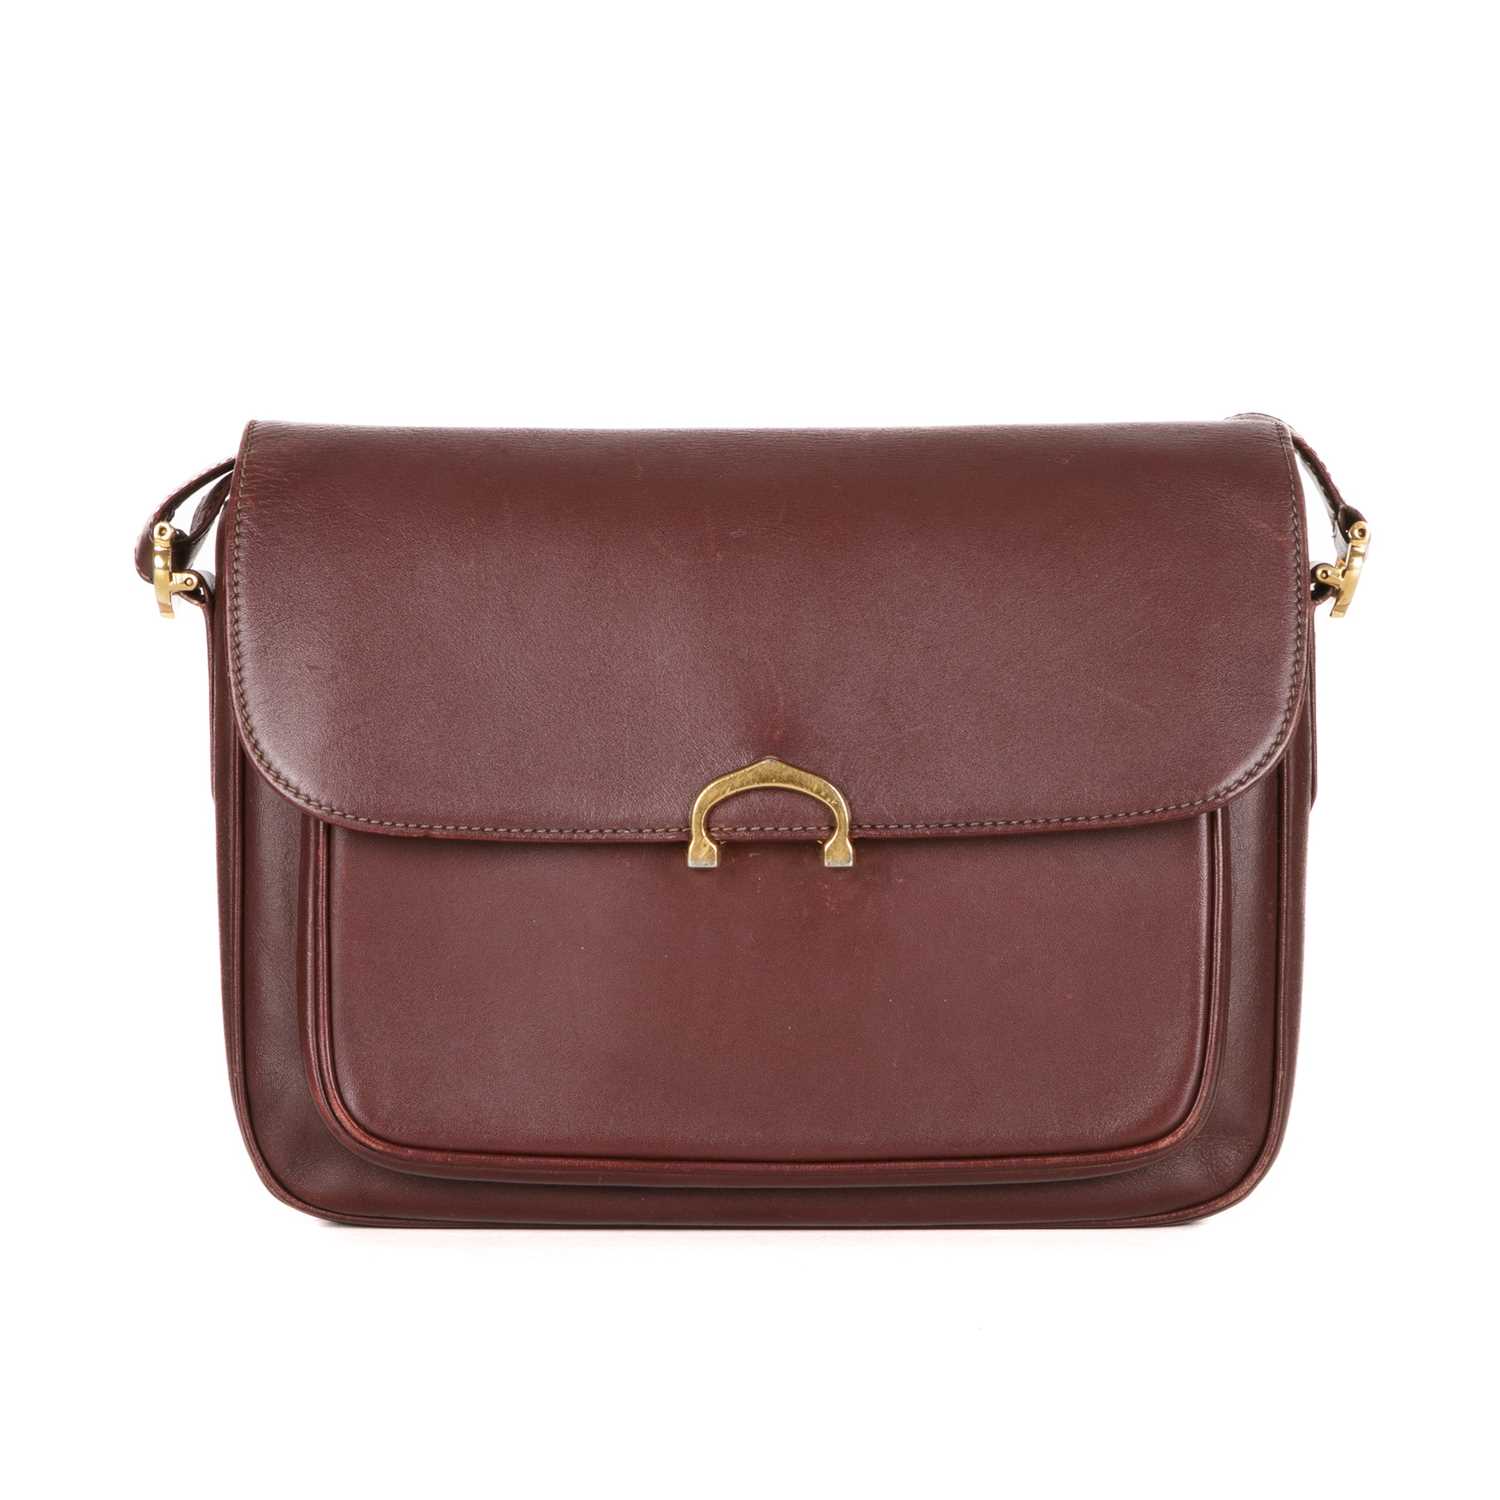 Cartier, a Bordeaux leather handbag, designed with a burgundy leather exterior, featuring gold-